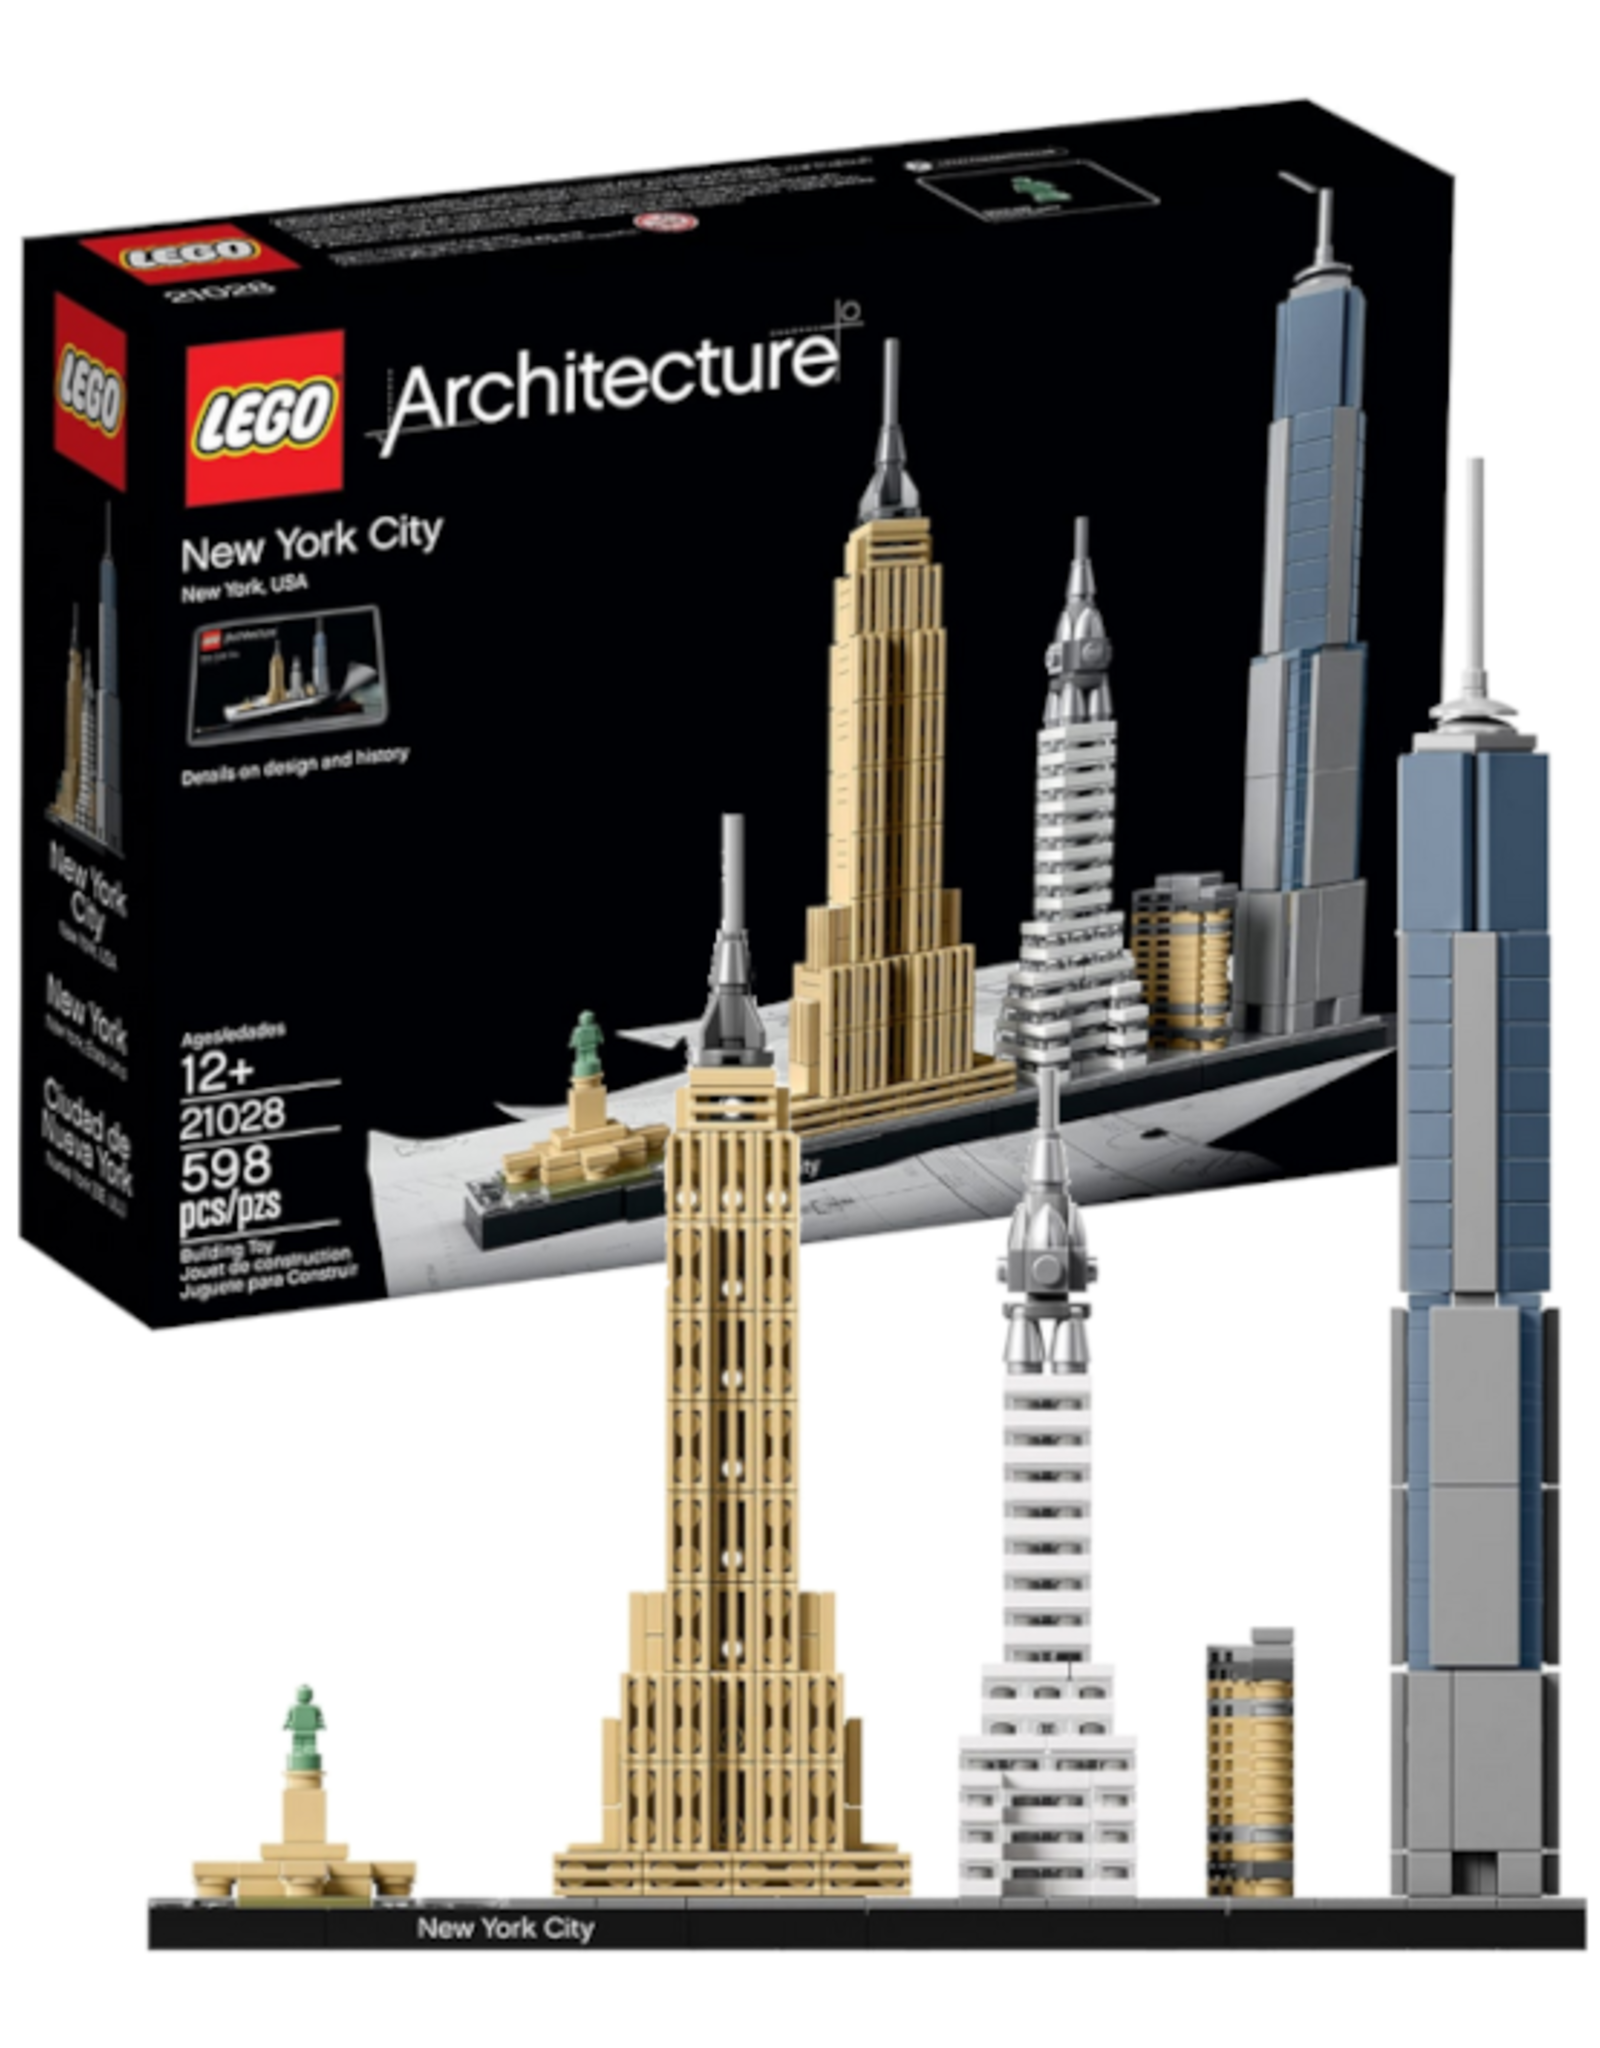 Review Lego Architecture New York City SET 21028 4K 